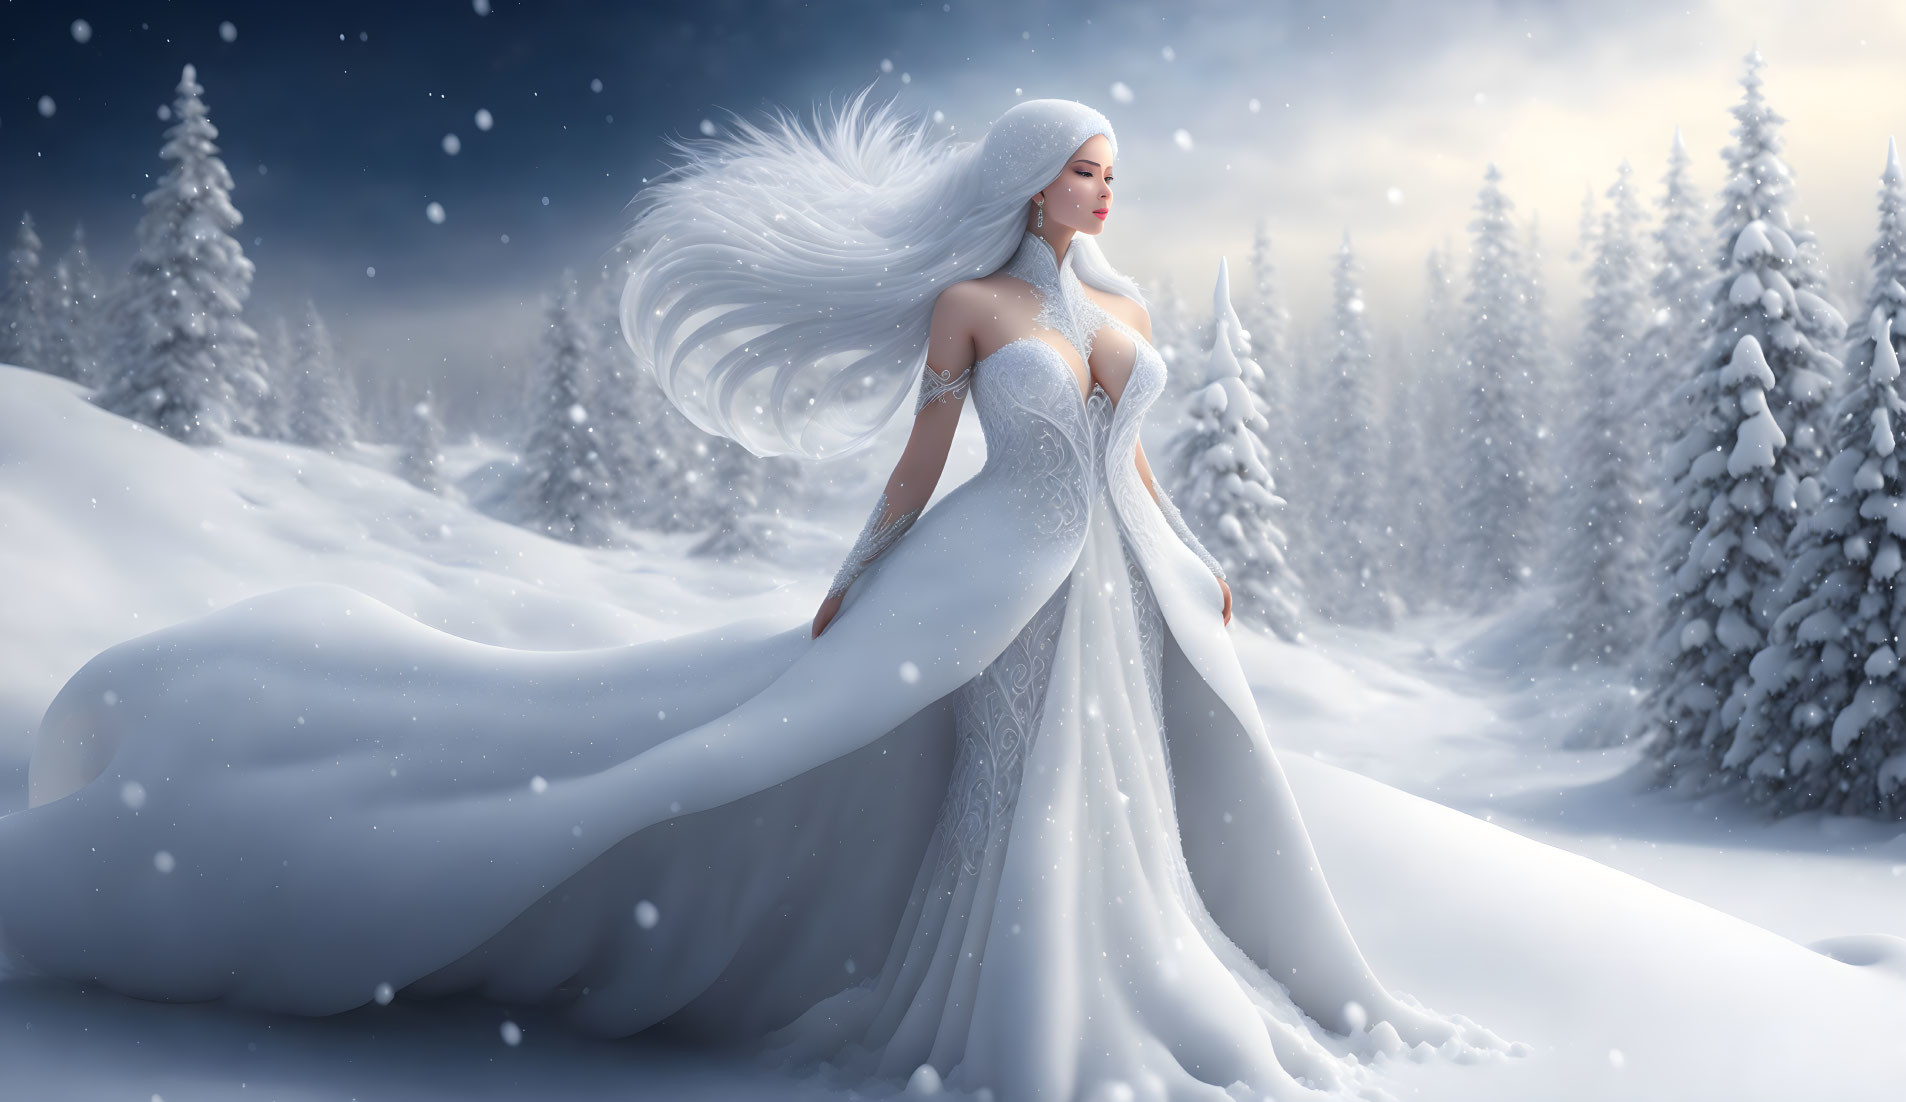 She and the snow are one